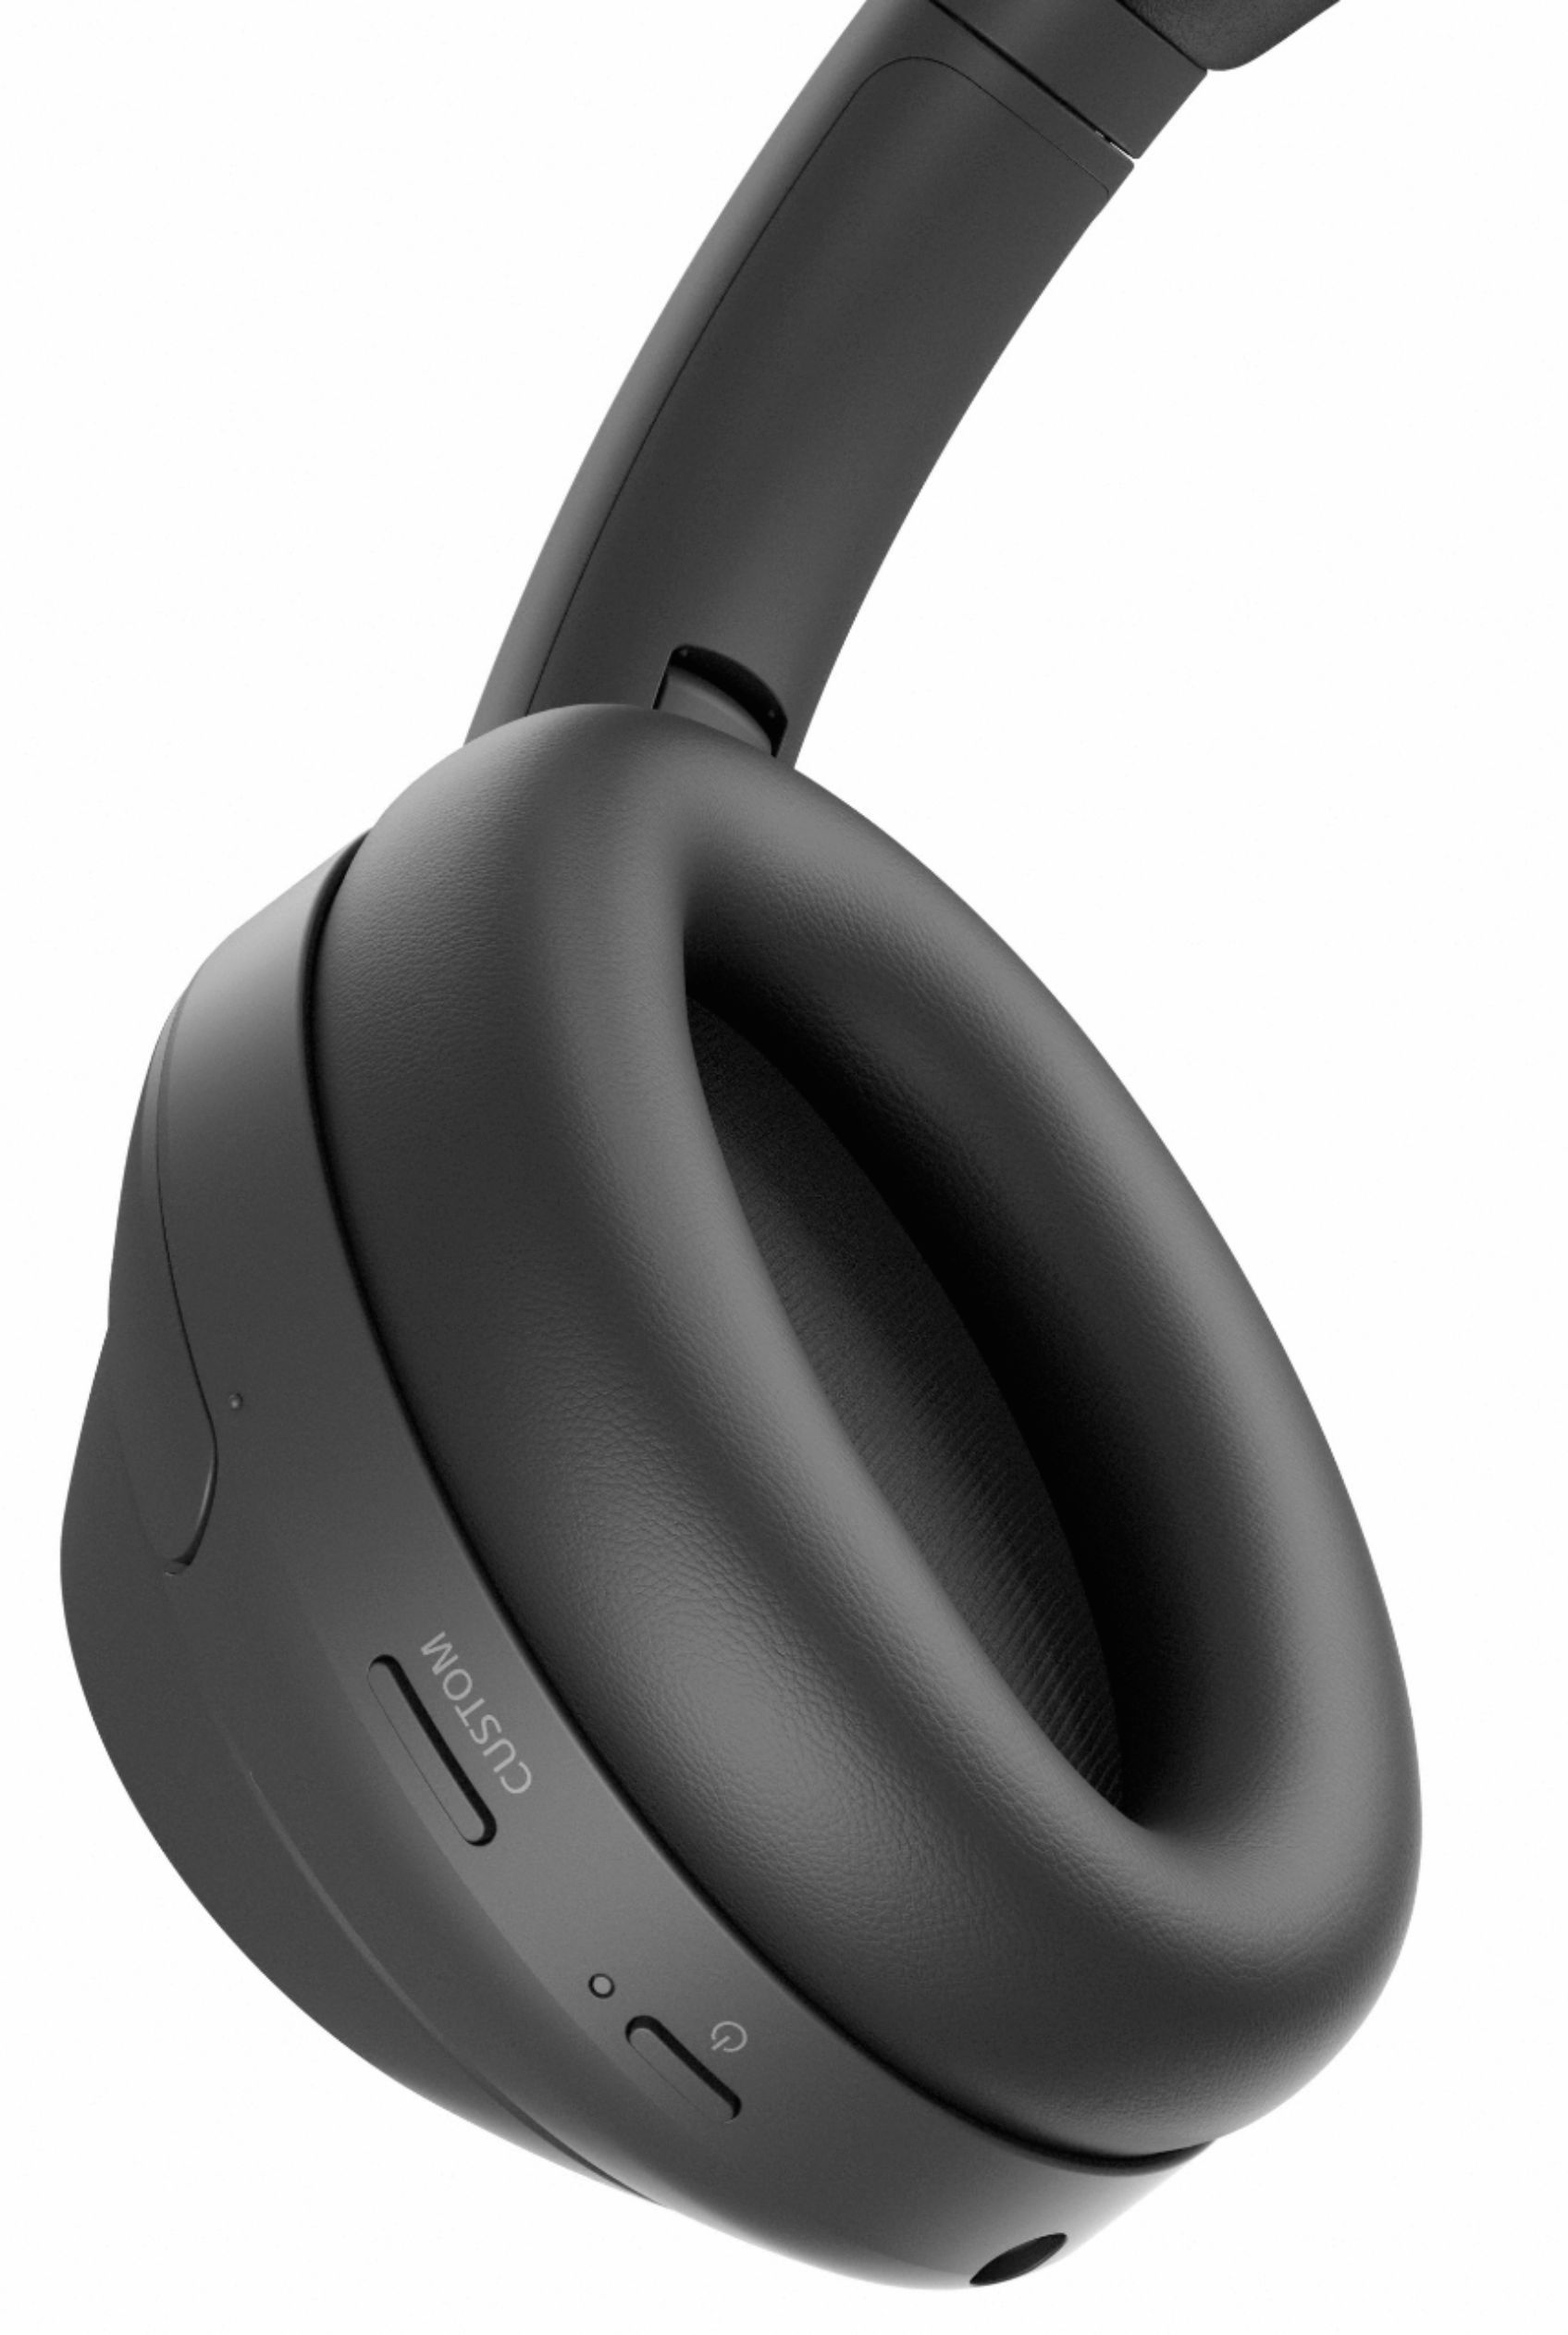 Sony WH1000XM4 Wireless Noise-Cancelling Over-the-Ear Headphones Black  WH1000XM4/B - Best Buy